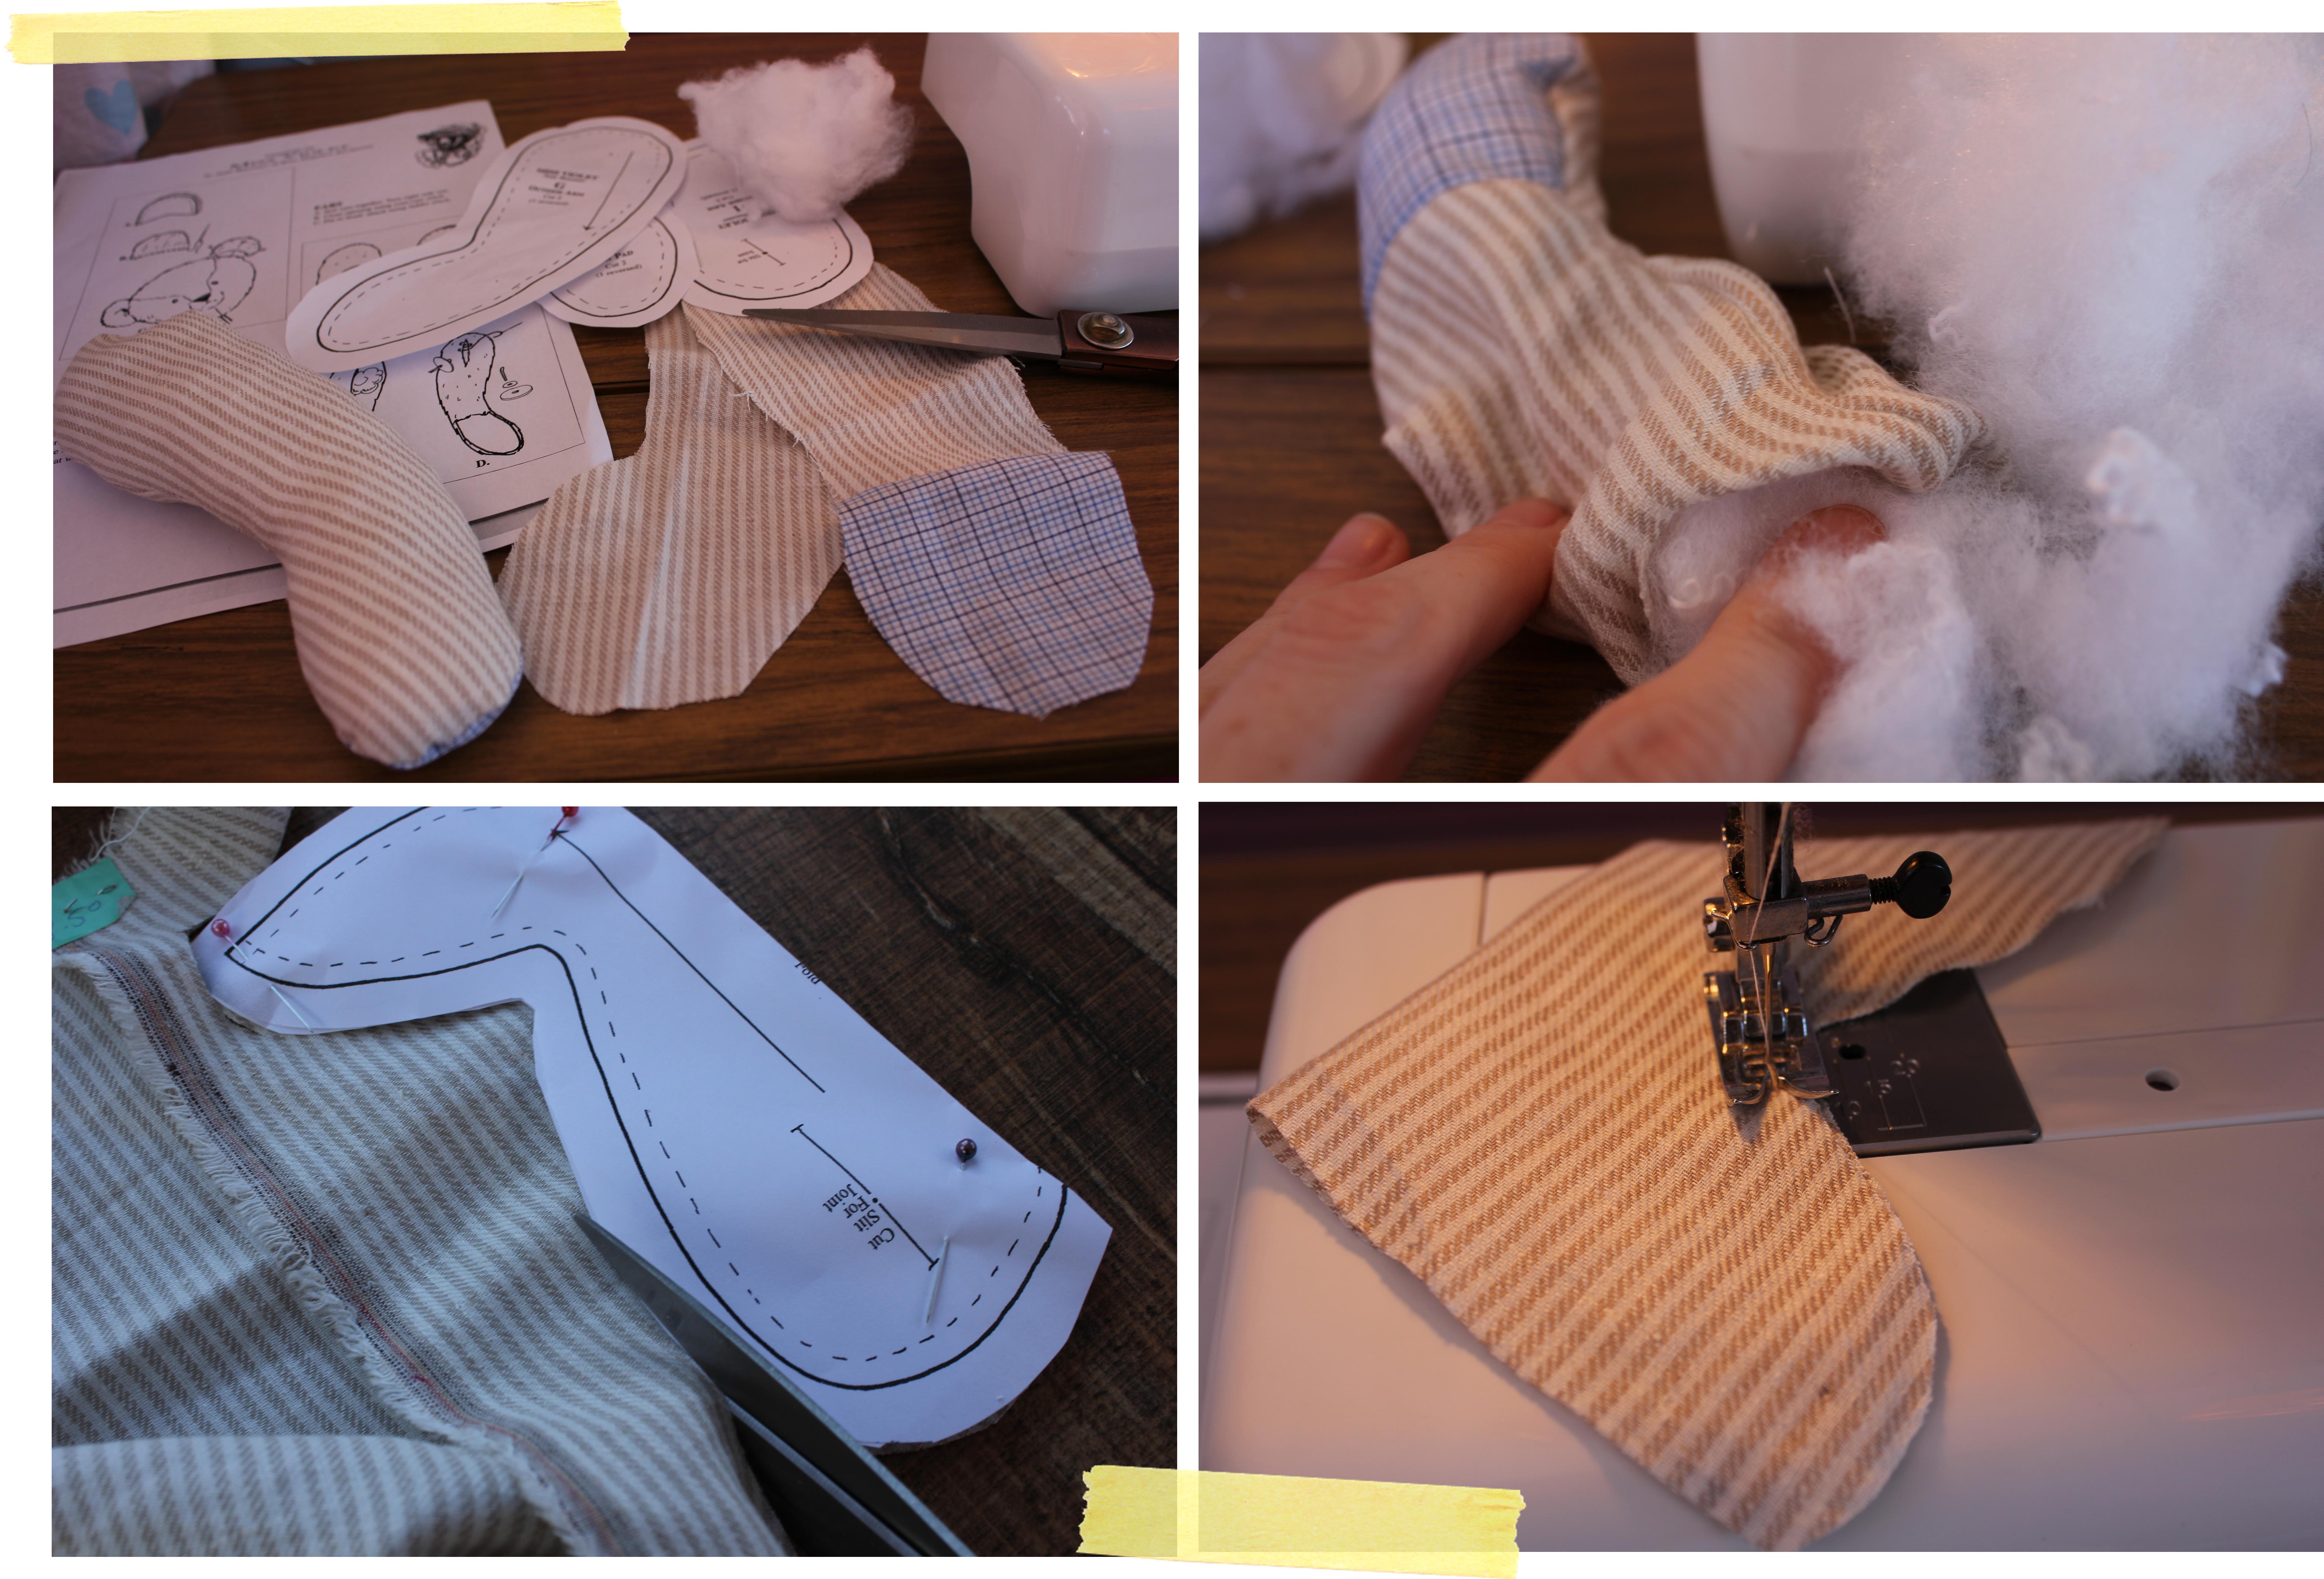 cassiefairys inspiration challenge on the blog - sewing a teddy bear for my nephews christening gift